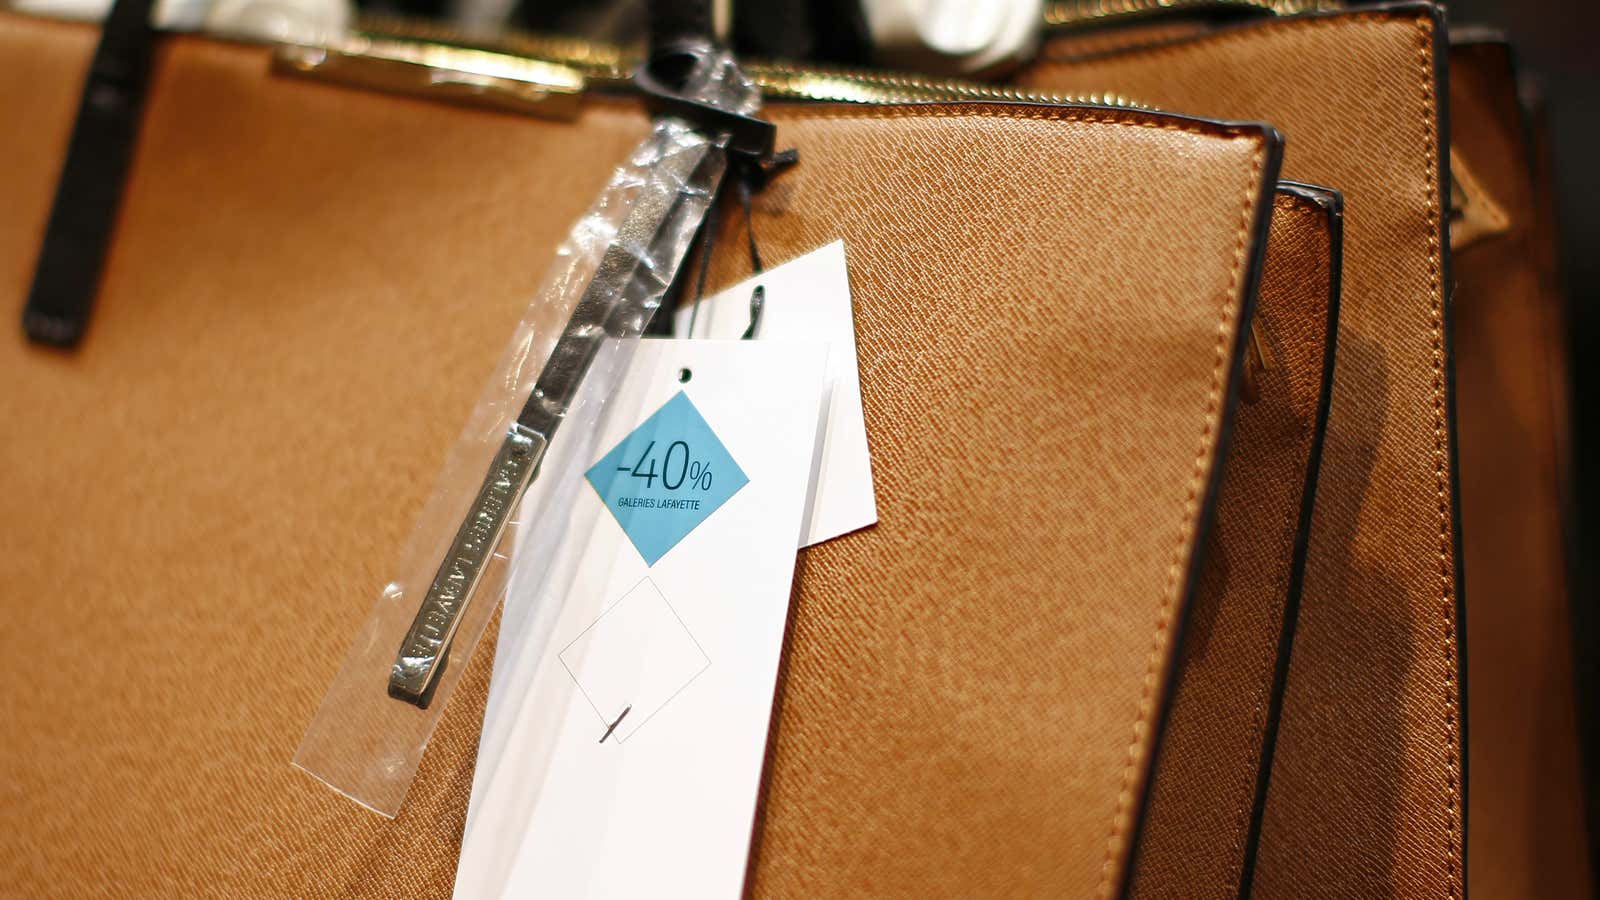 Dizzying handbag discounts have some analysts uneasy about demand for the product.